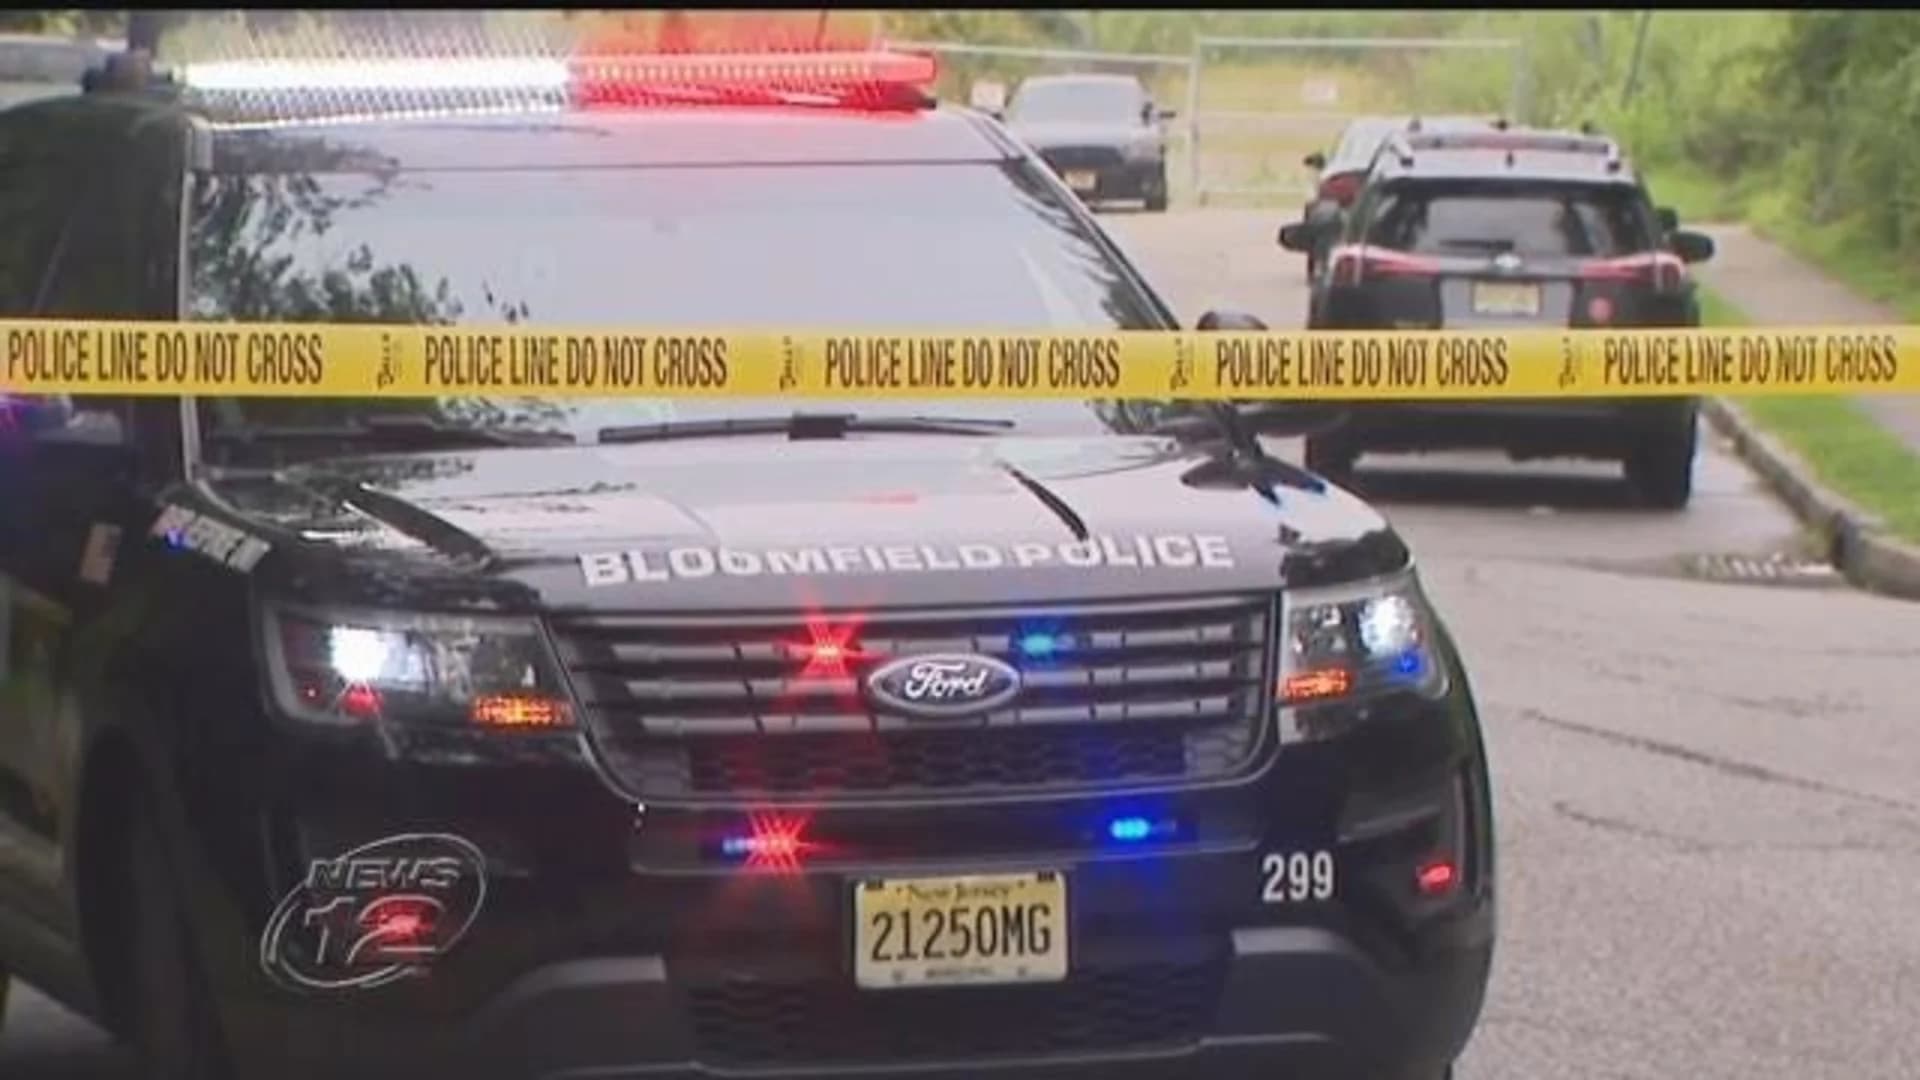 Man shot by police responding to domestic violence call in Bloomfield